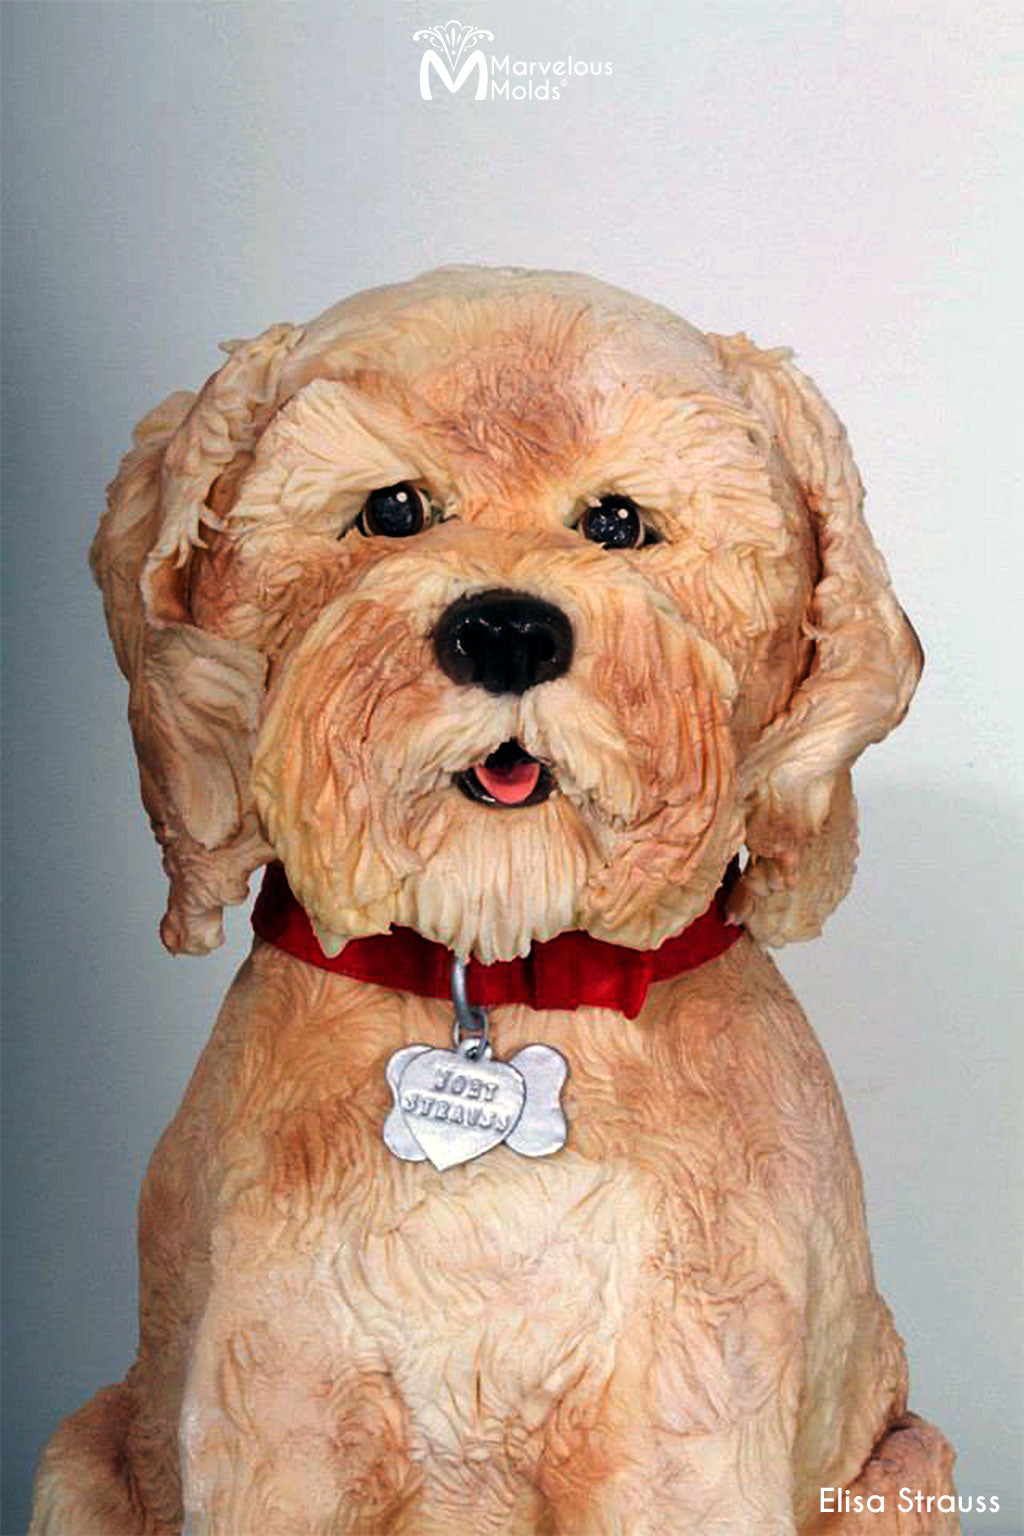 Edible Fondant Dog Cake with Fur Texture Created Using the Marvelous Molds Long Fur Impression Mat